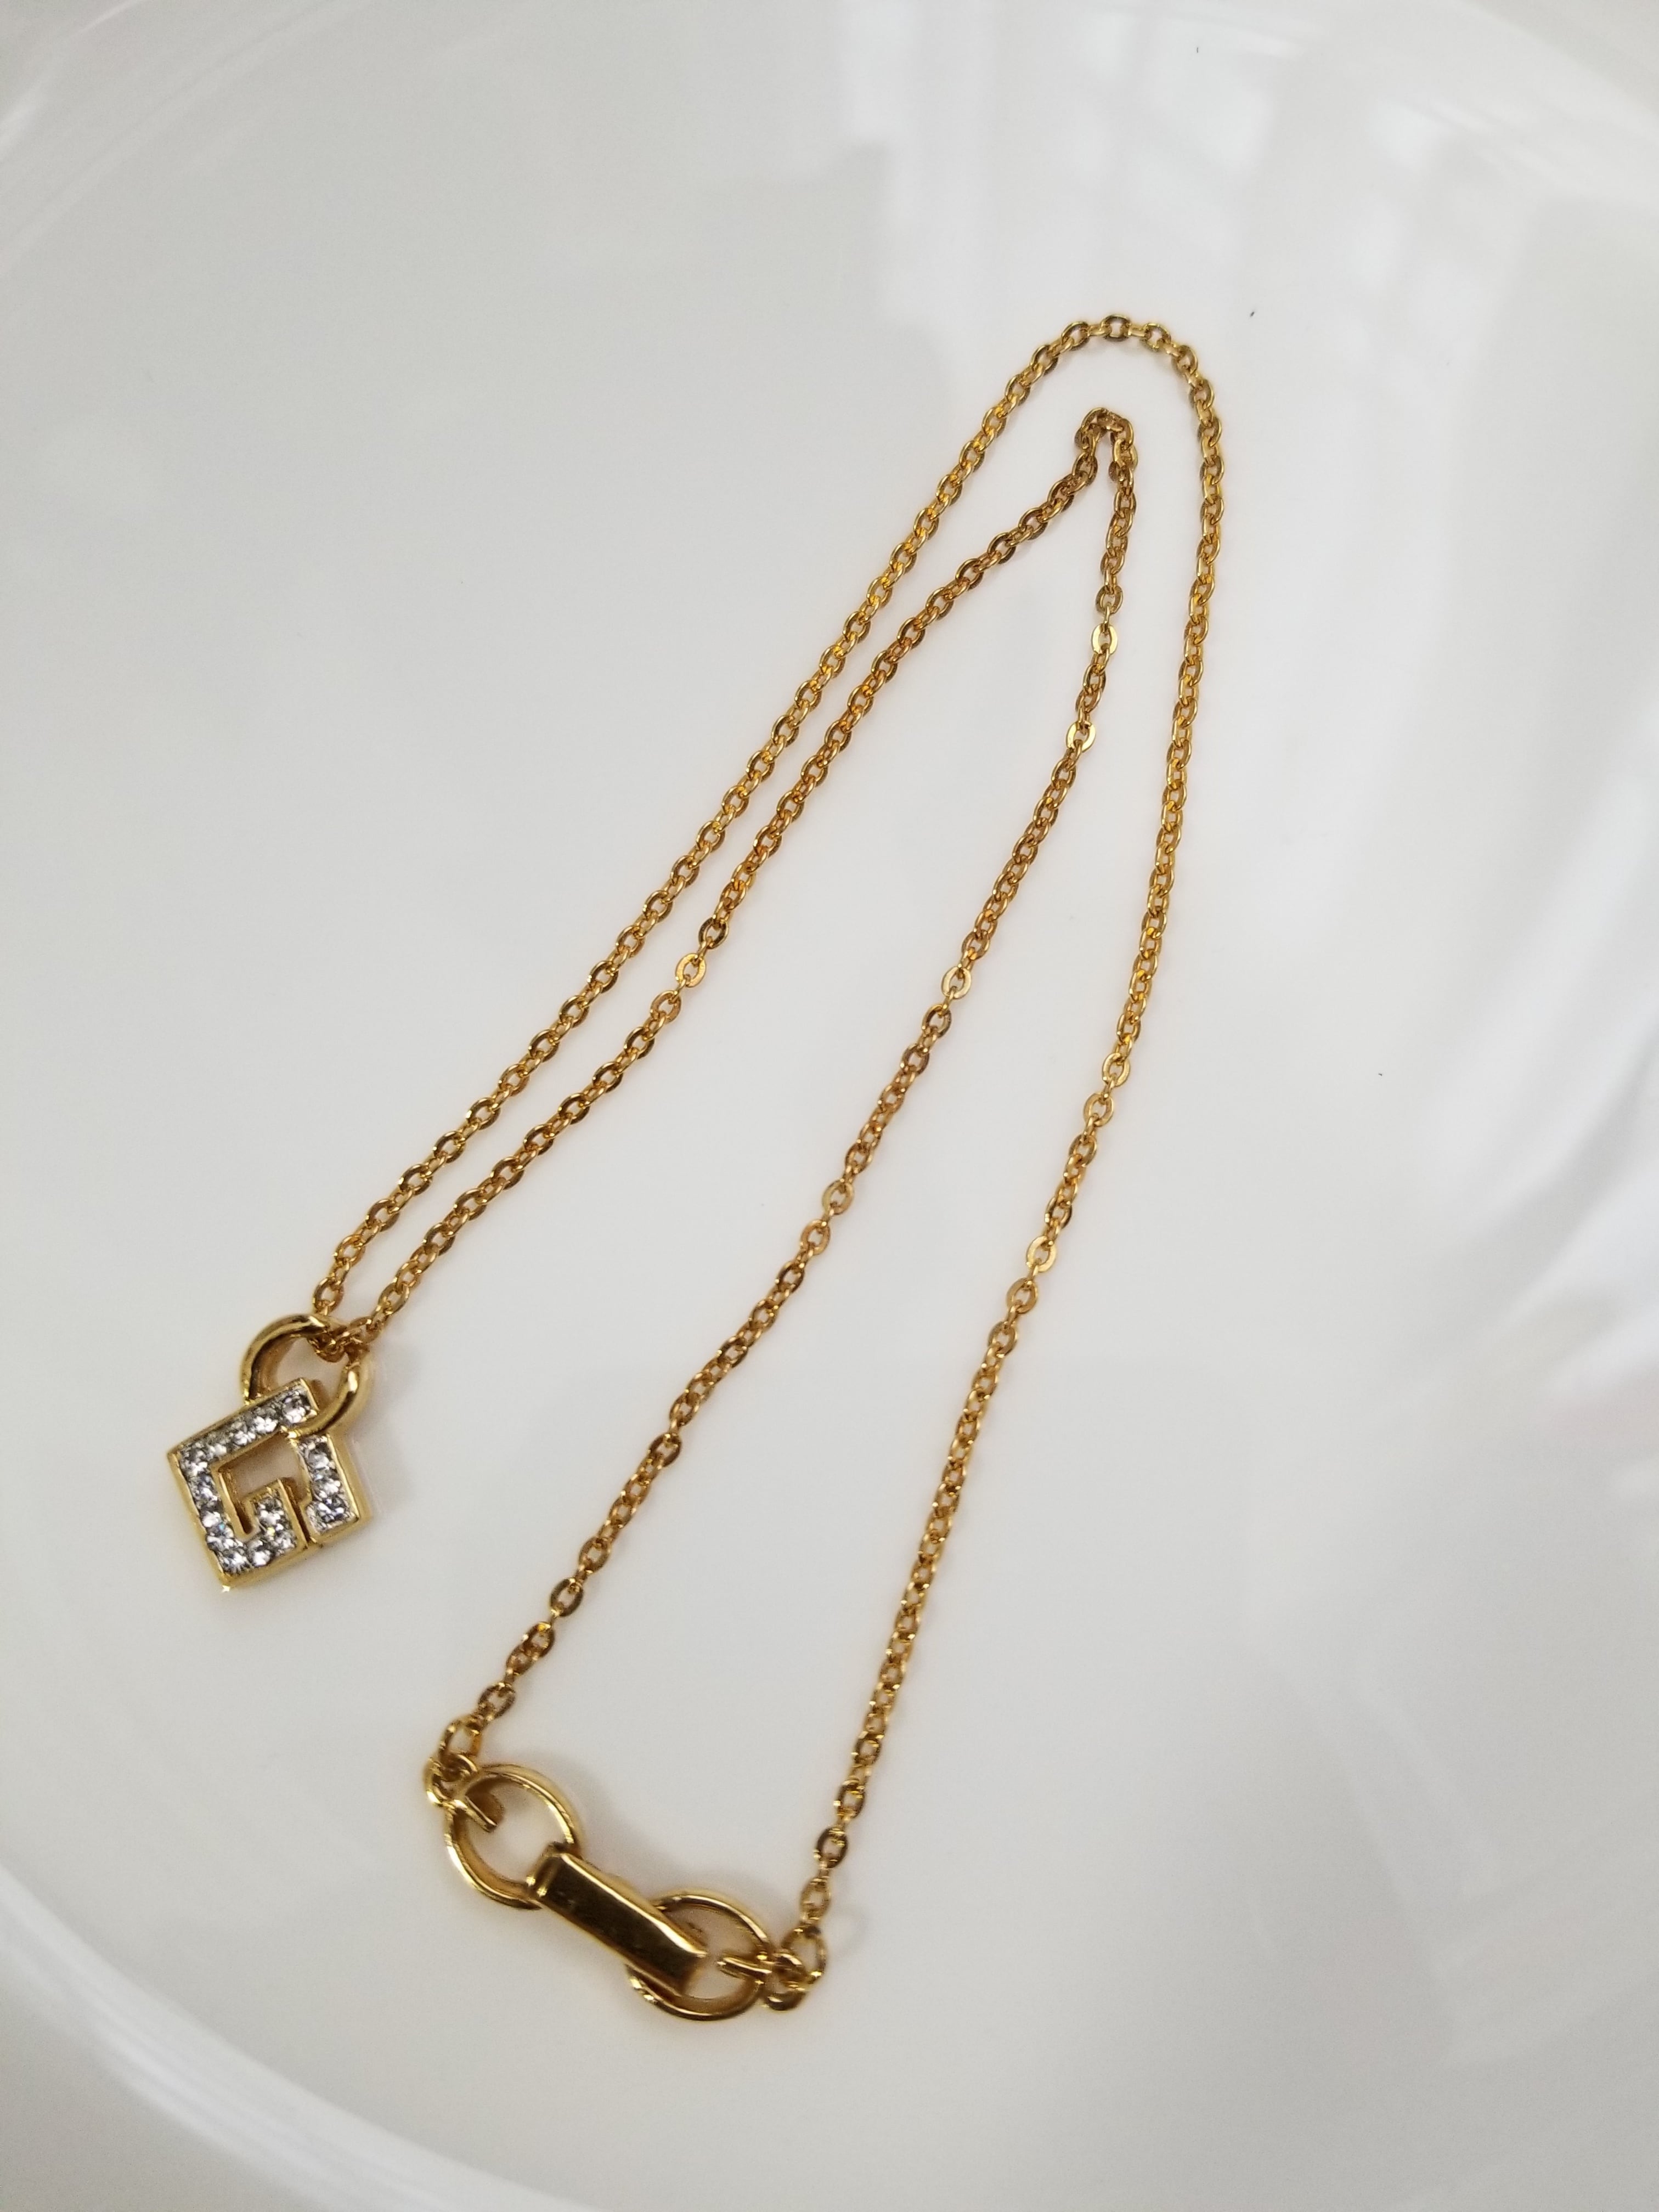 GIVENCHY Vintage necklace ジバンシー ヴィンテージ ネックレス 